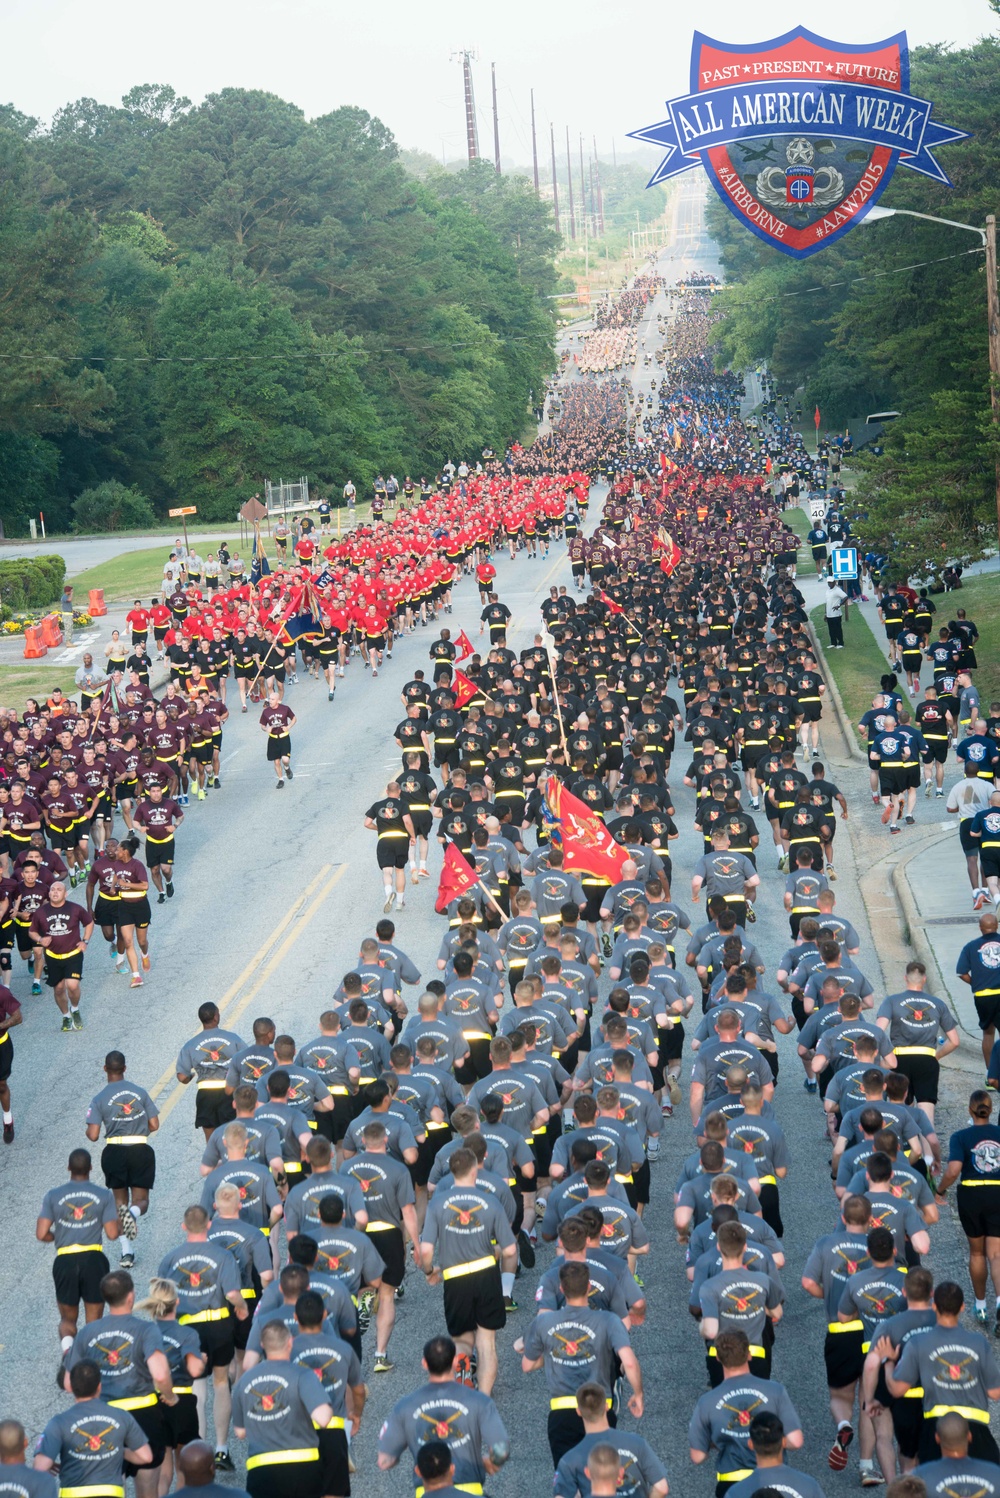 All American Week kicks off with a four-mile Division Run